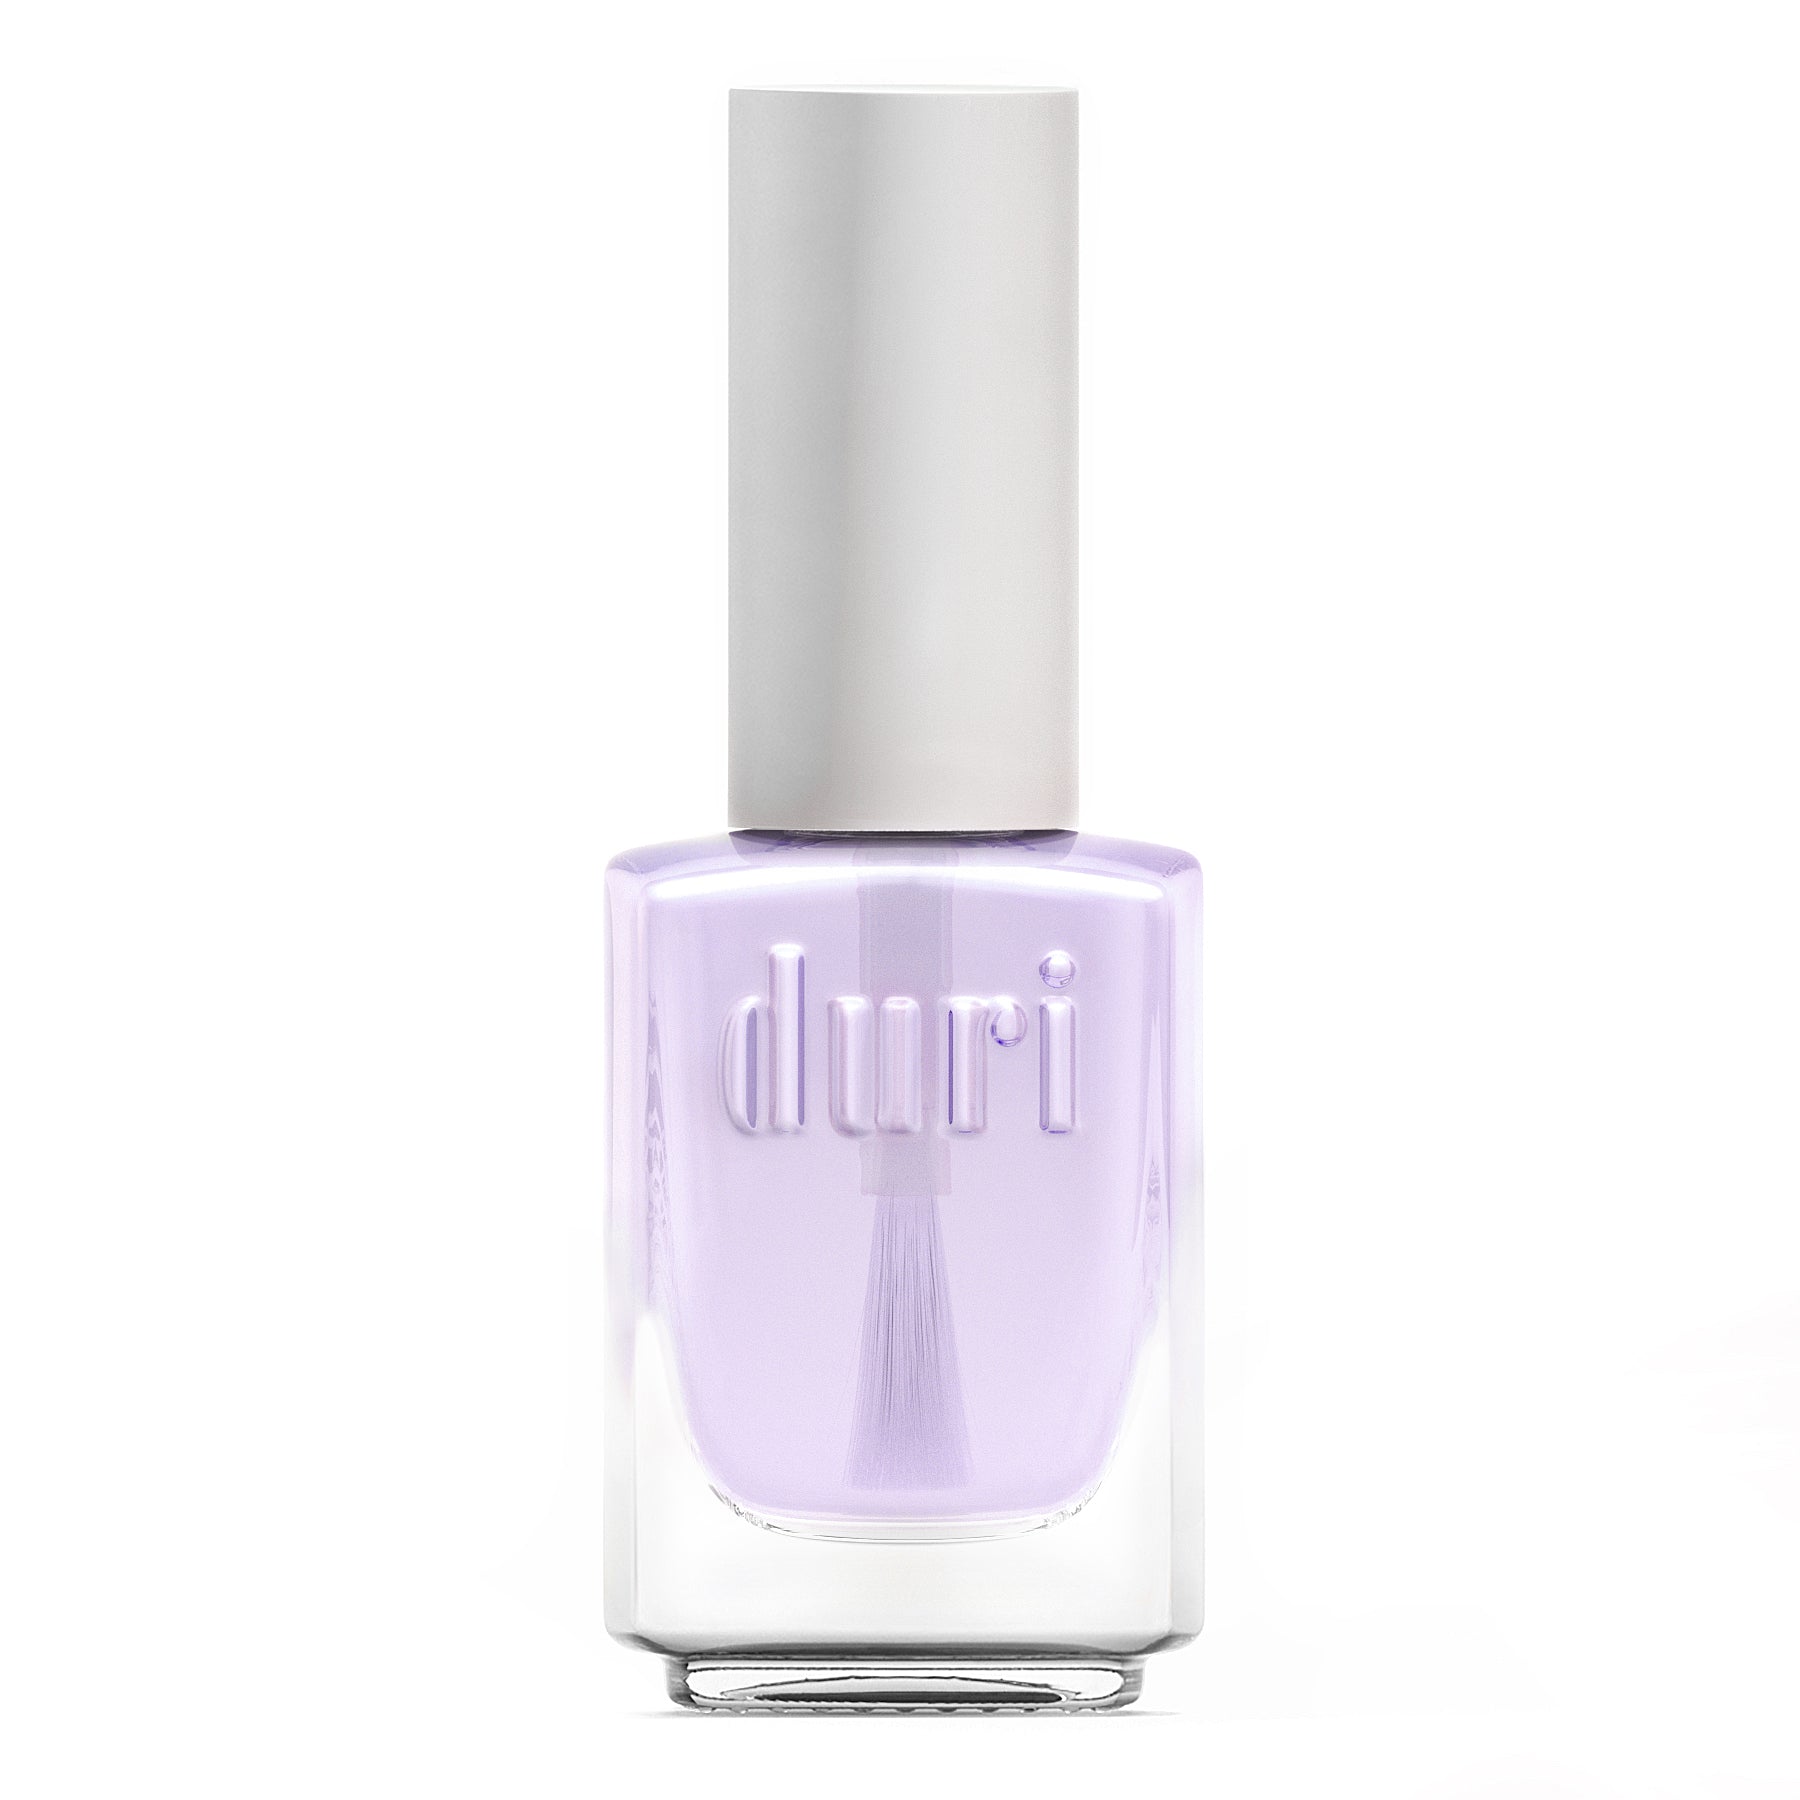 Express Top Coat, Fast Drying, Glossy, Long Lasting, by Duri Cosmetics